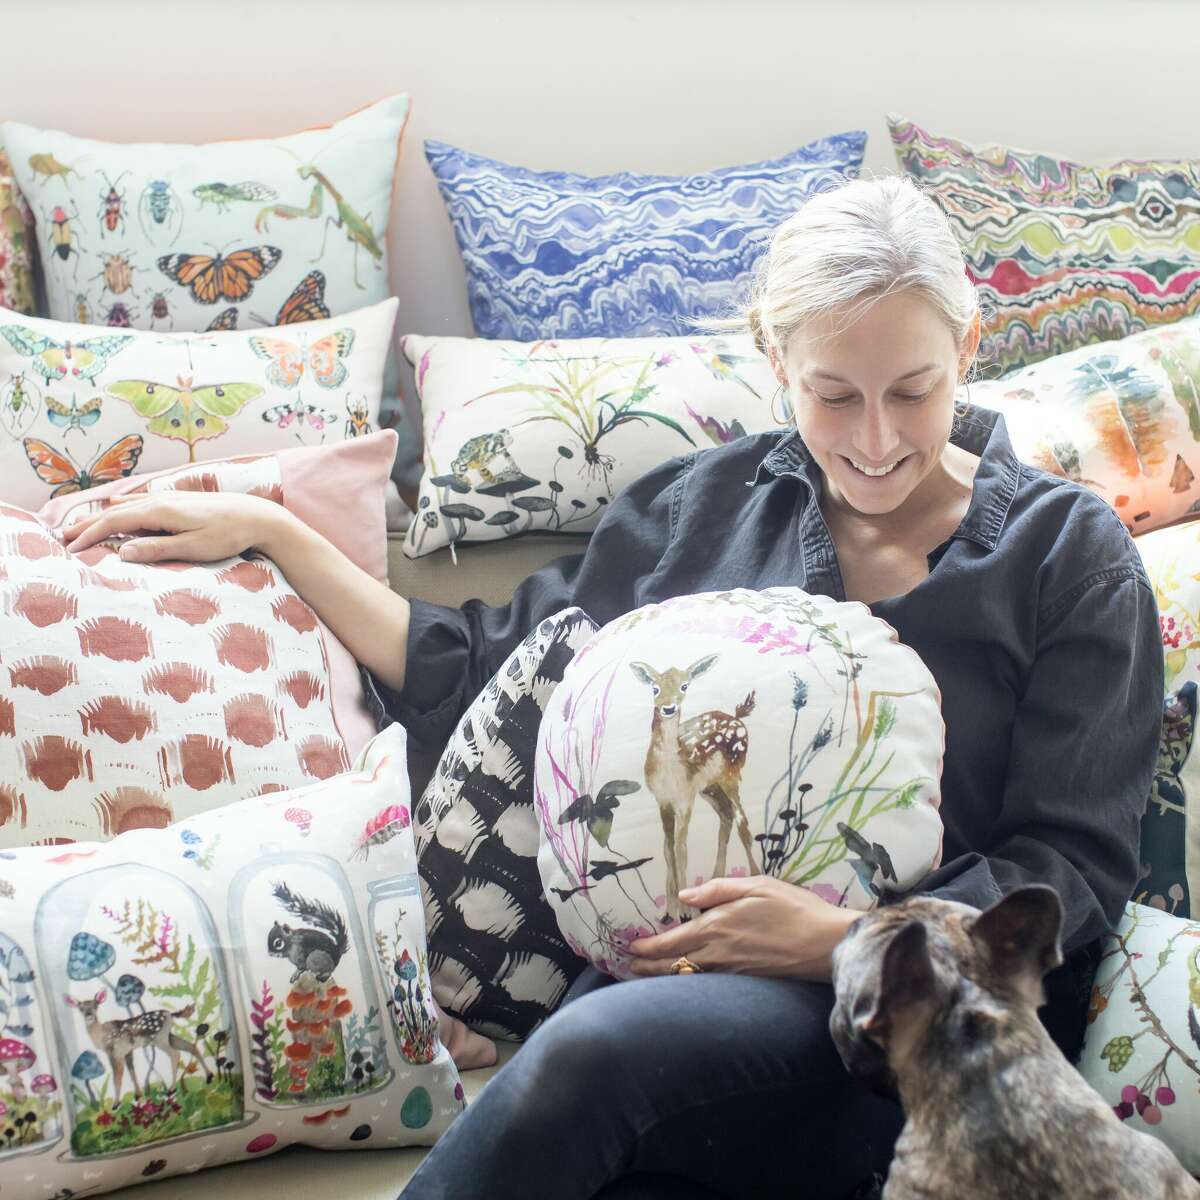 Artist and textile designer Betsy Olmsted with pillows made with fabrics featuring her nature-inspired designs.